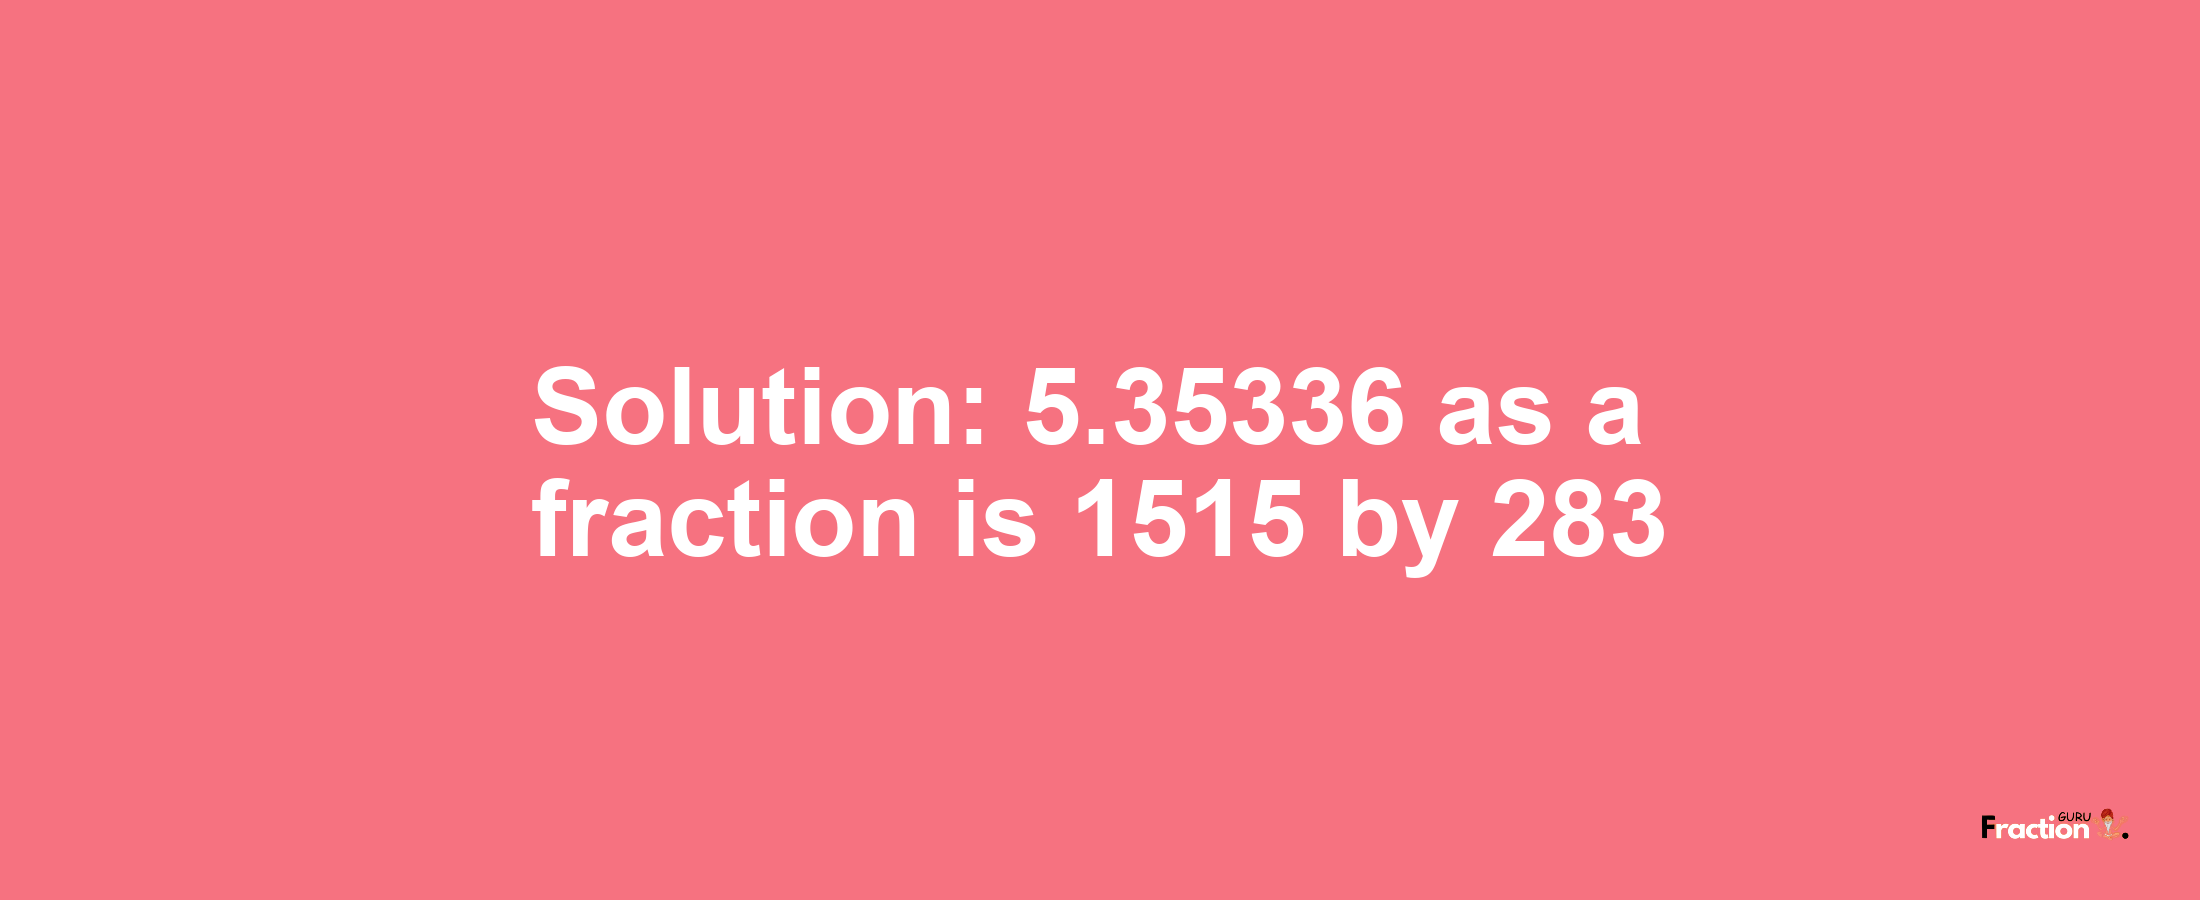 Solution:5.35336 as a fraction is 1515/283